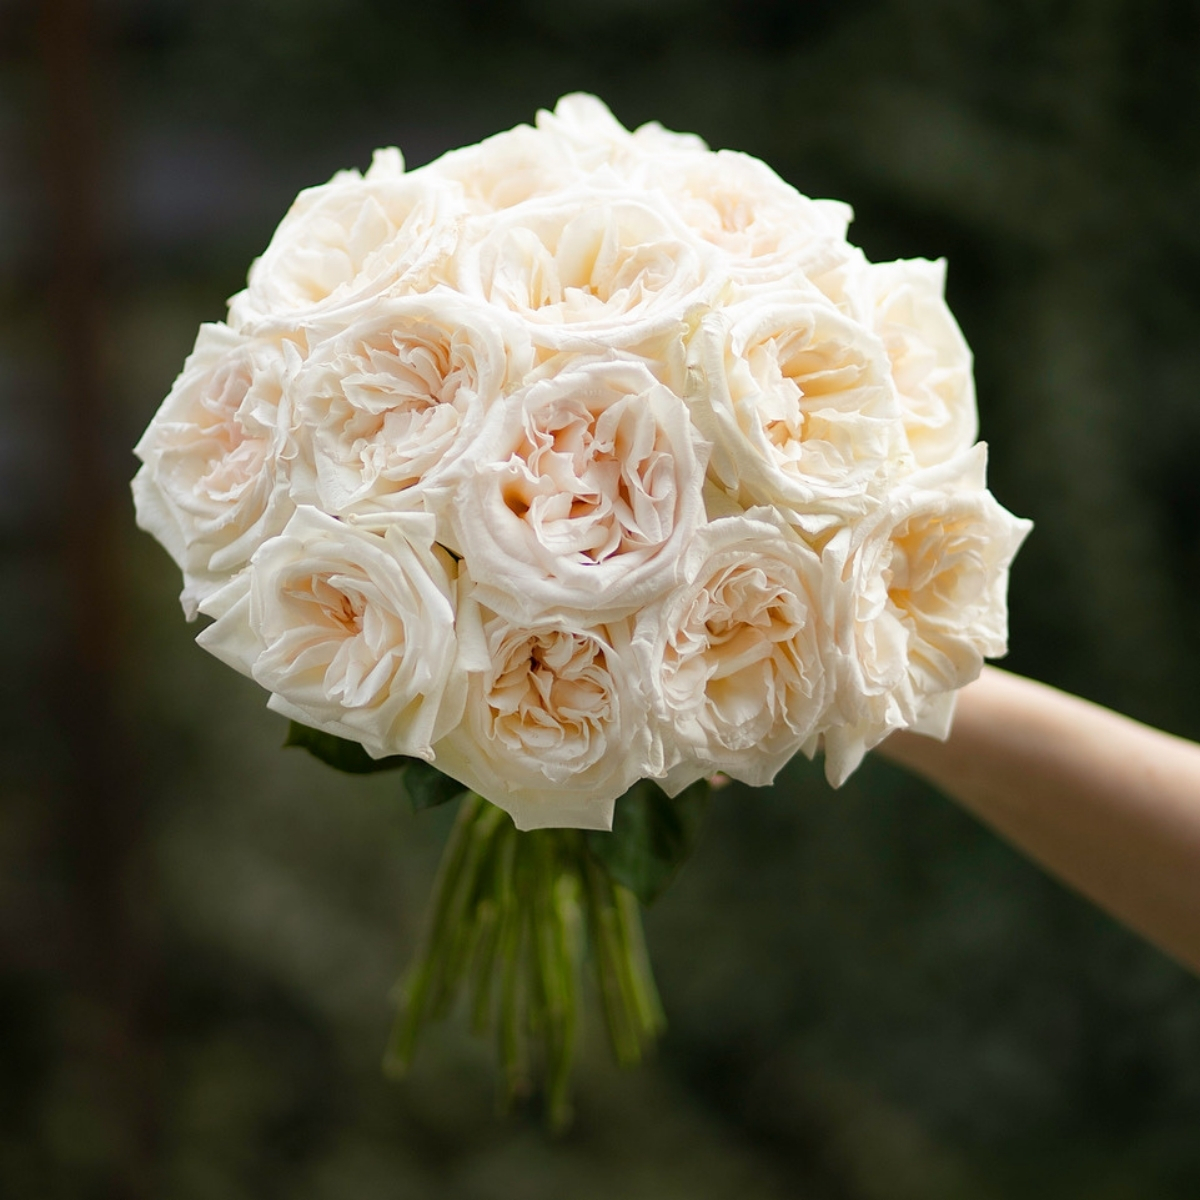 white-ohara-the-perfect-garden-rose-for-your-wedding-or-event-featured